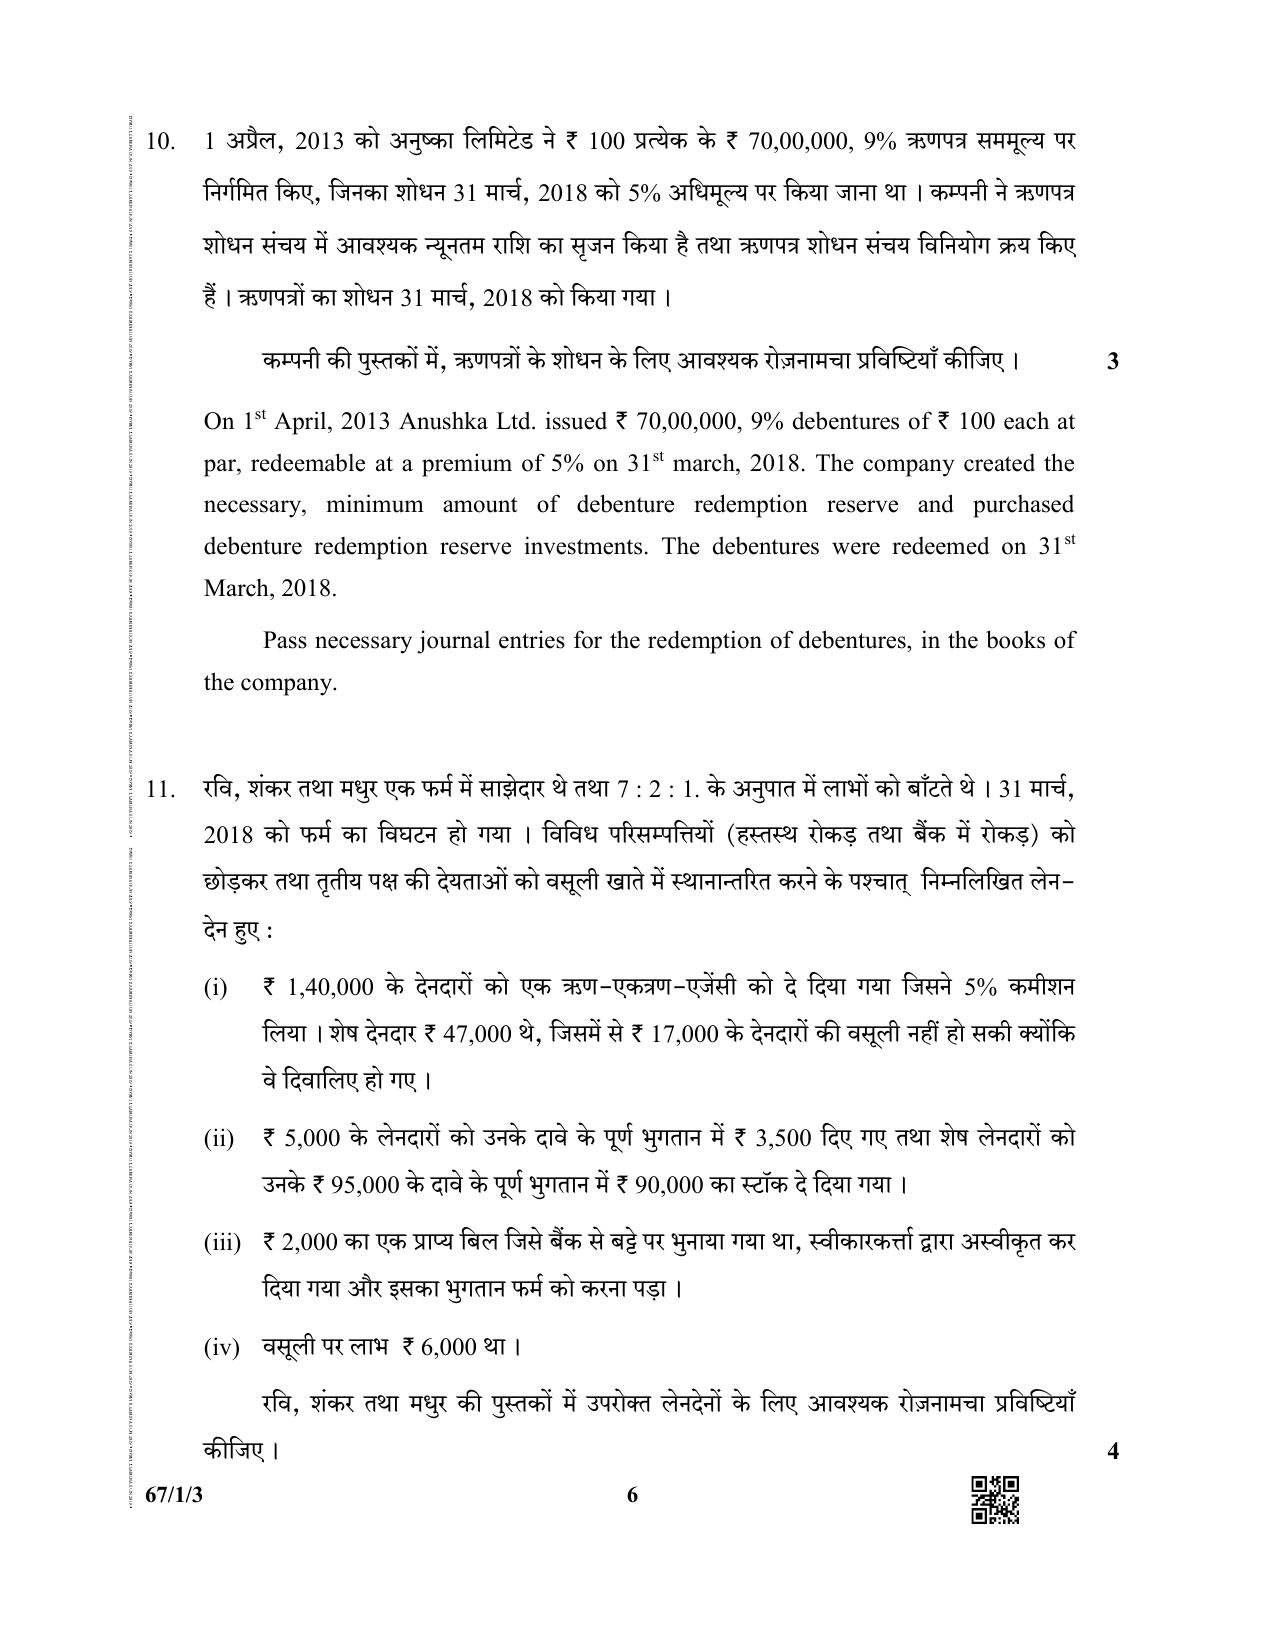 CBSE Class 12 67-1-3  (Accountancy) 2019 Question Paper - Page 6